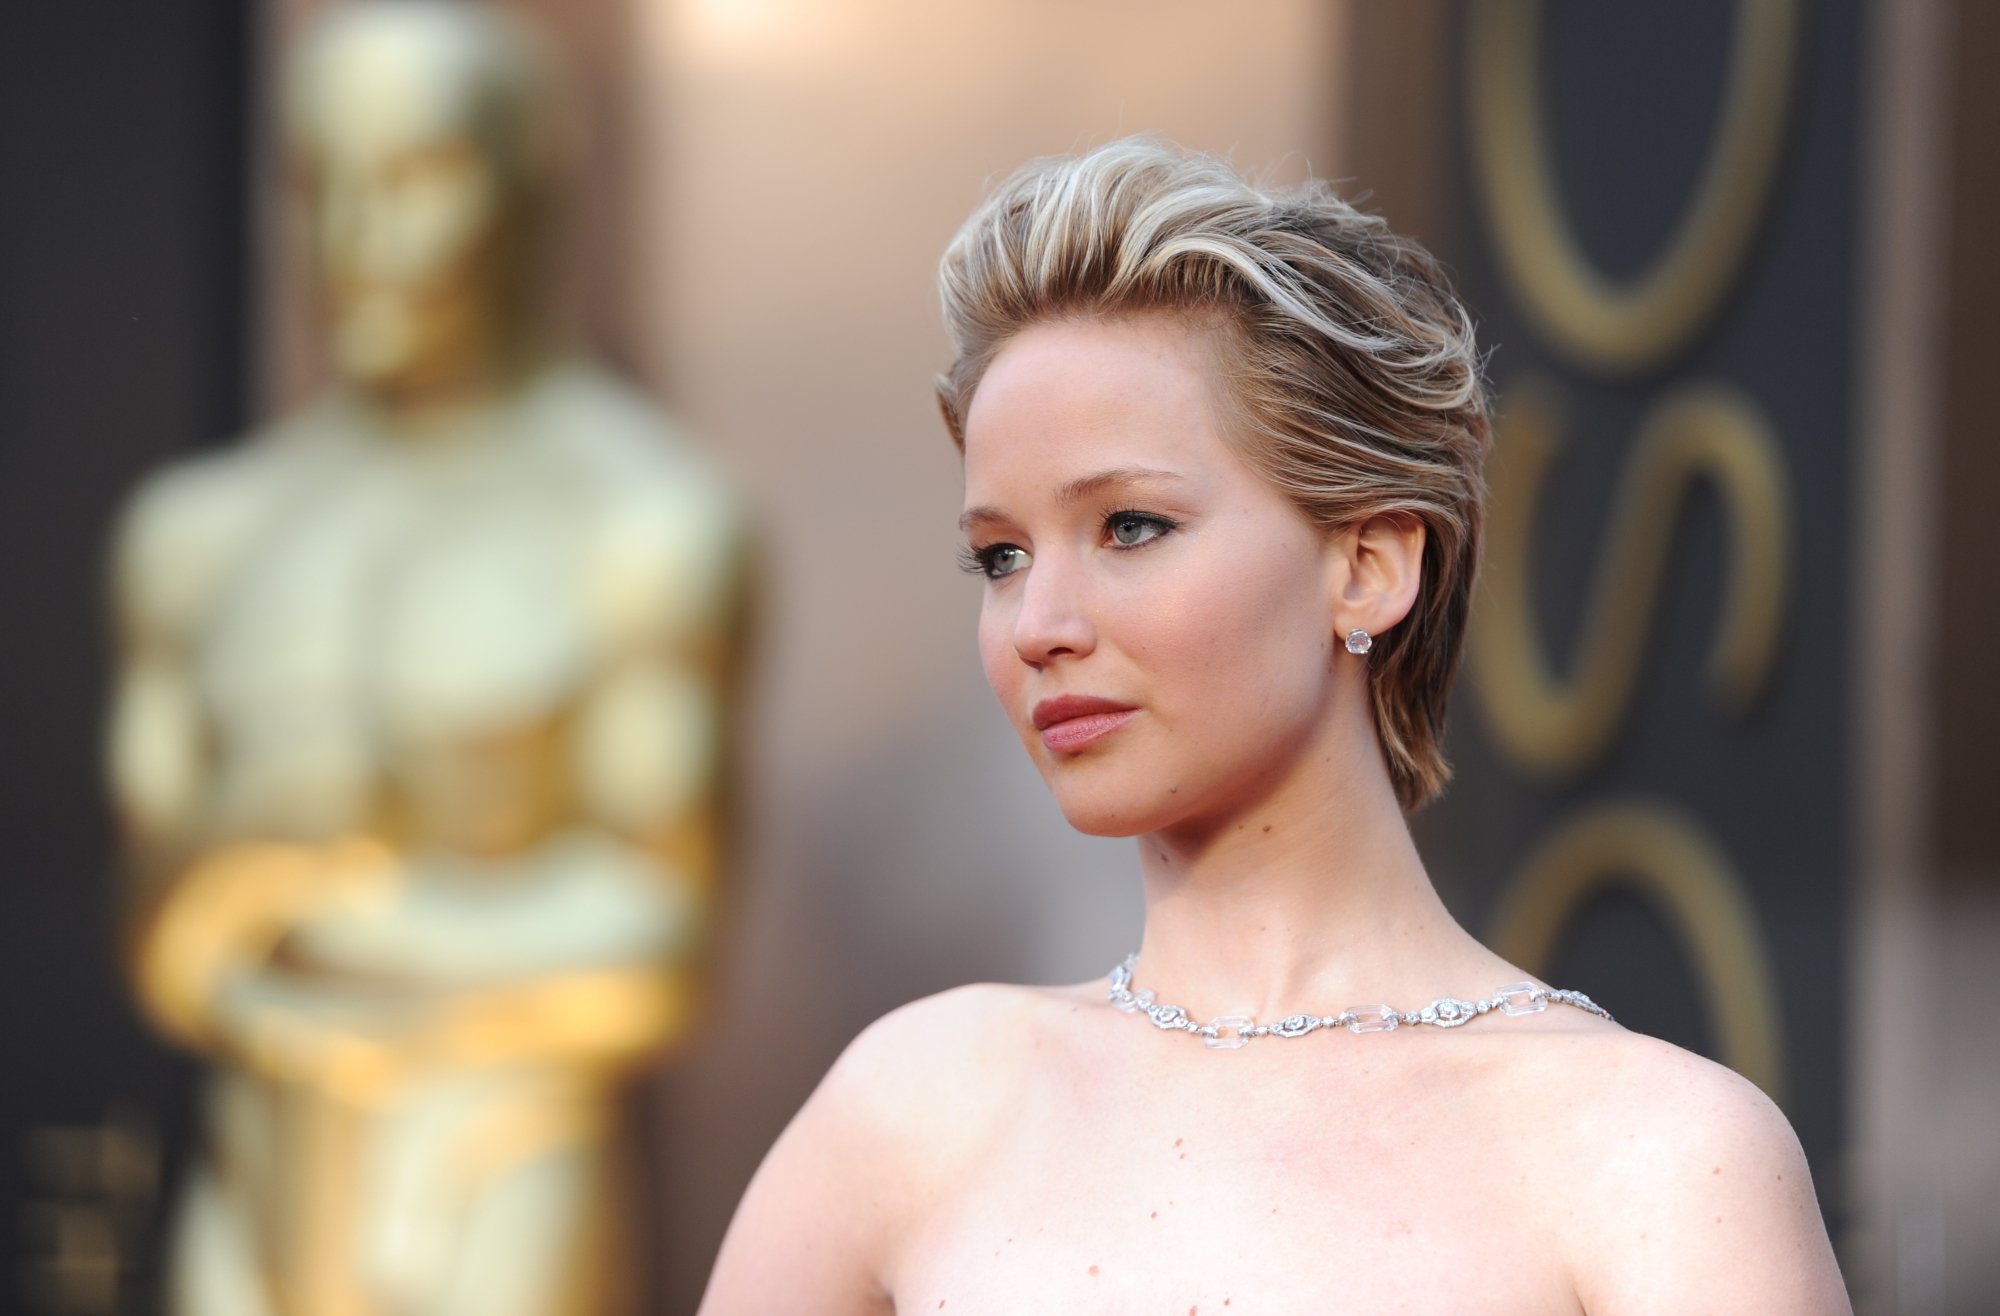 Jennifer Lawrence's Blonde Hair Evolution: From Long Waves to Short ... - wide 1